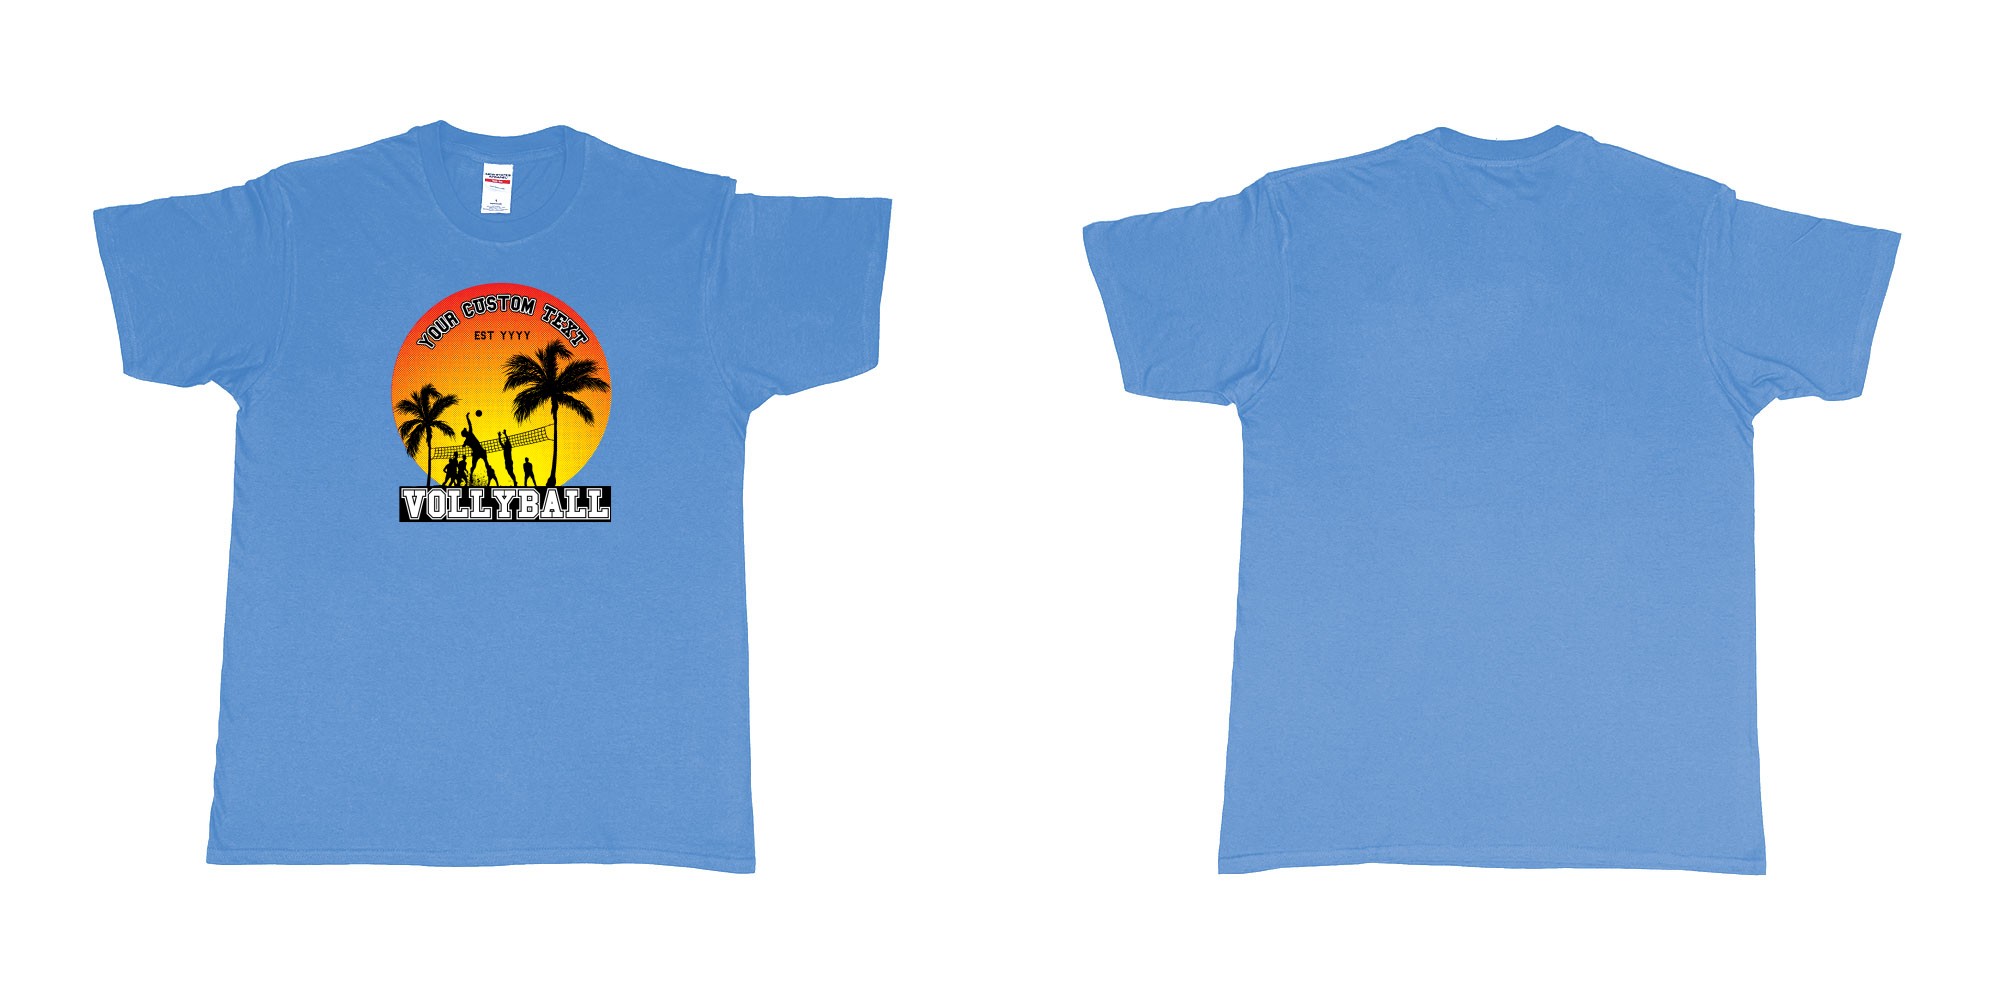 Custom tshirt design sunset volleyball t shirt with a sunset view and your custom print text and year in fabric color carolina-blue choice your own text made in Bali by The Pirate Way